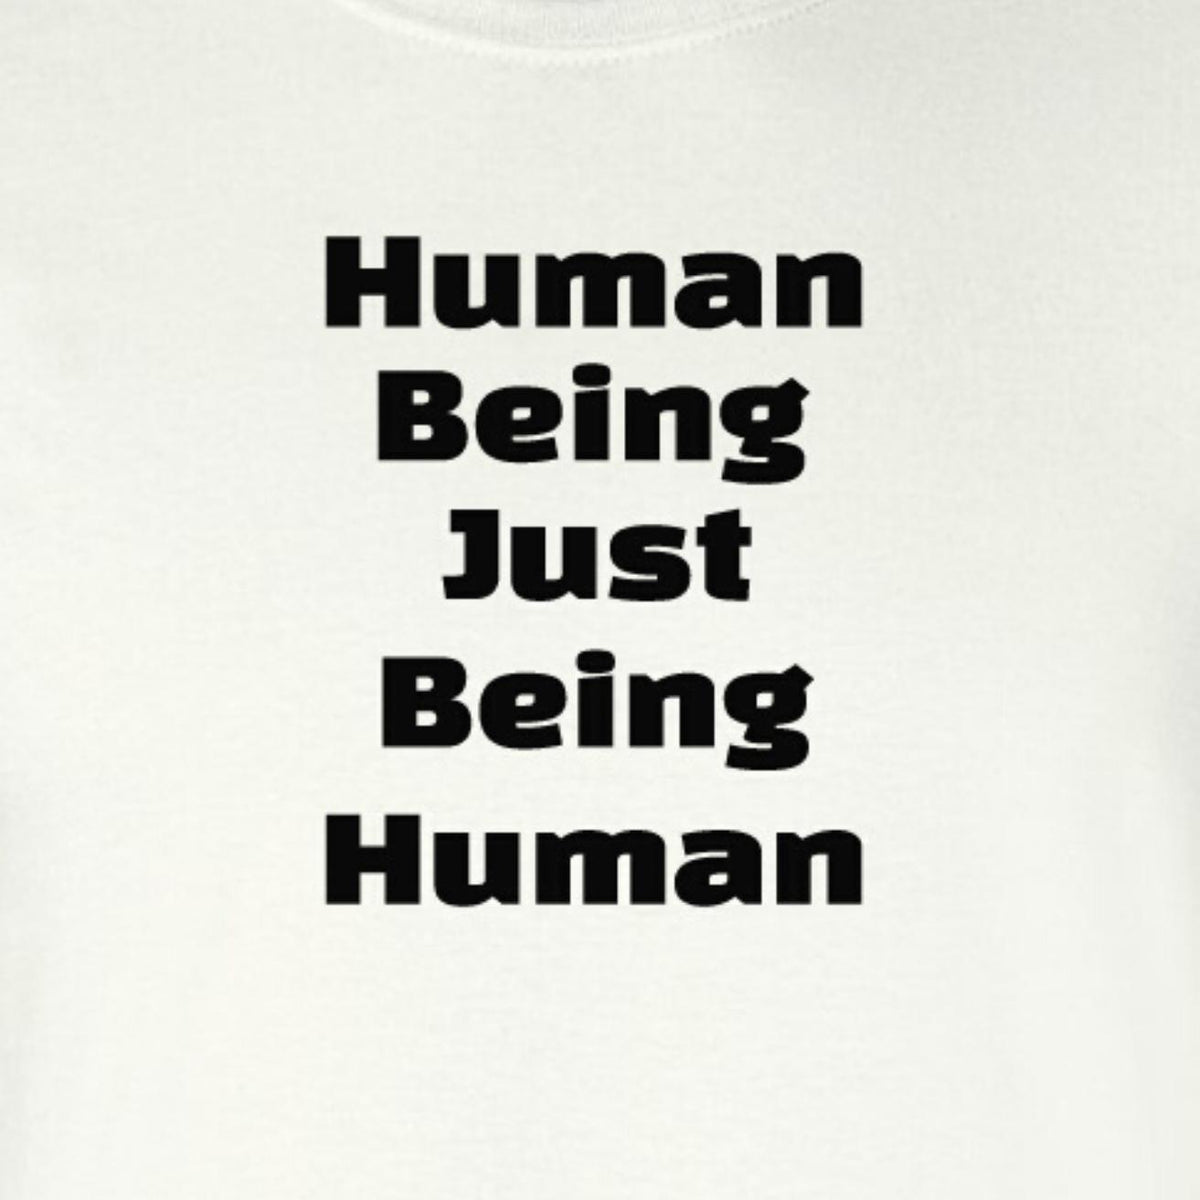 Human Being Just Being Human Tee